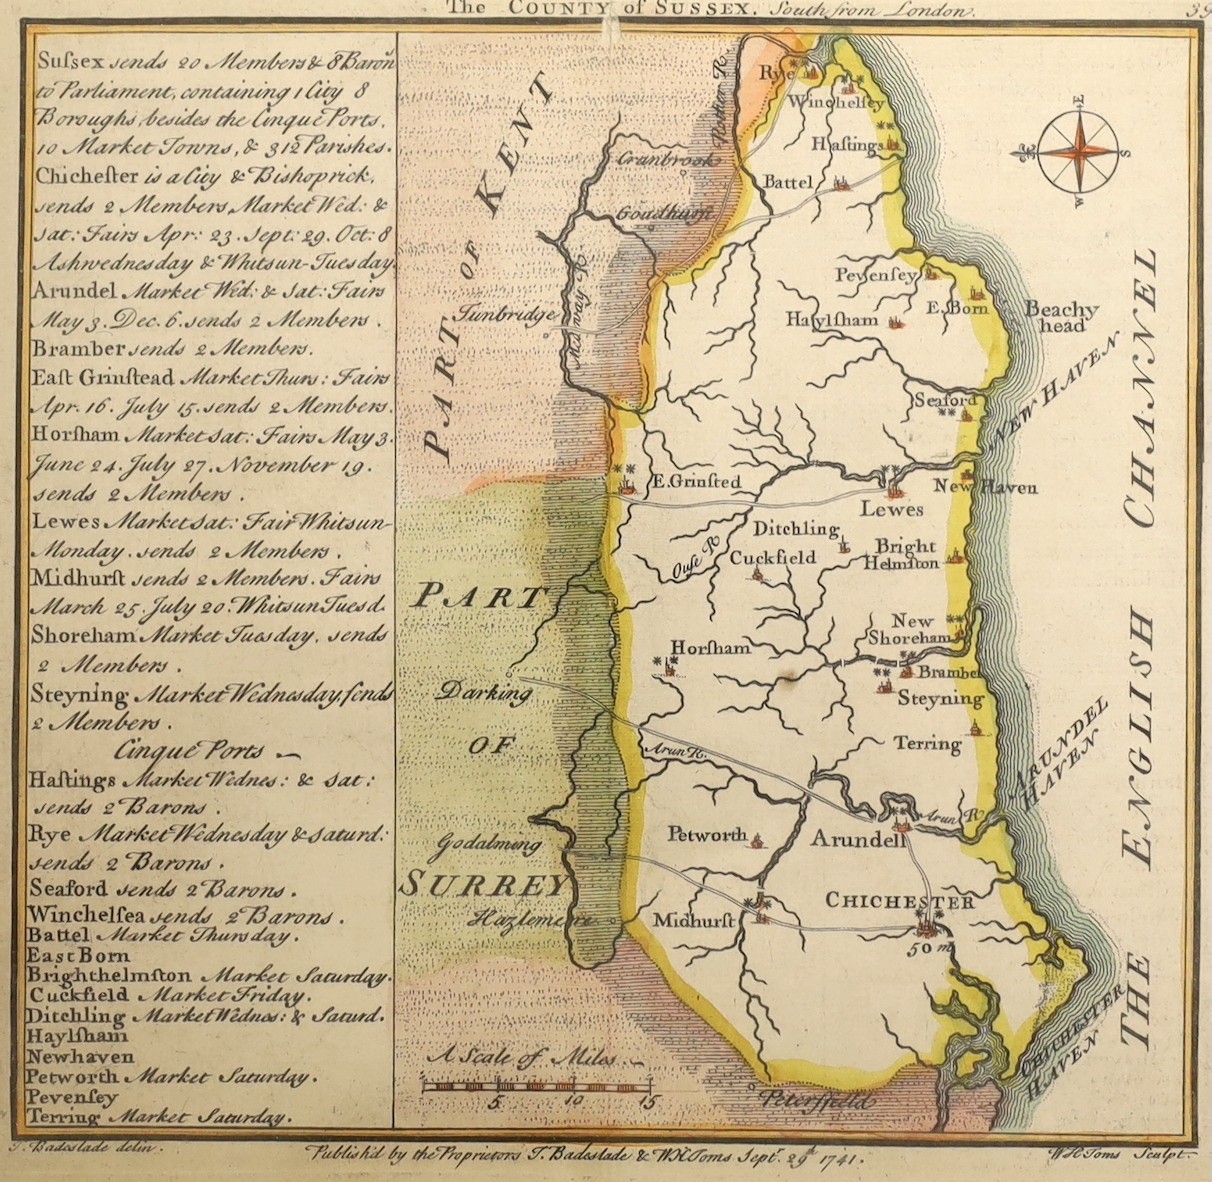 Toms after Badeslade, coloured engraving, Map of the County of Sussex 1741, 15 x 16cm